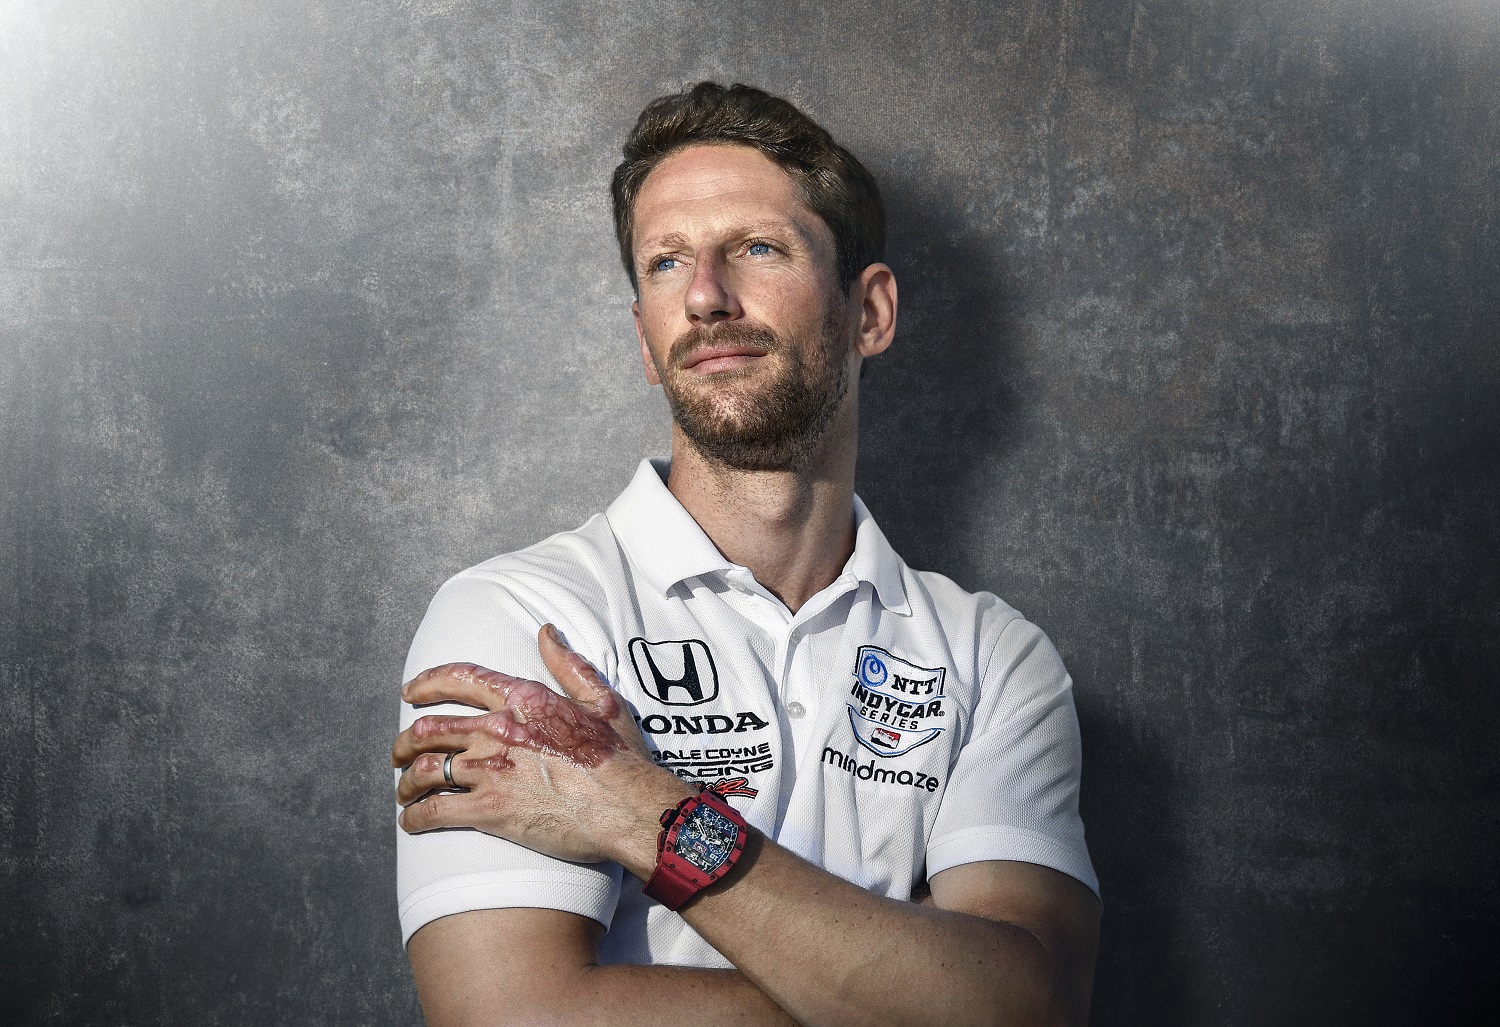 Romain Grosjean poses for a portrait at the IndyCar Detroit Grand Prix on June 11, 2021. | Rick Dole/Getty Images)